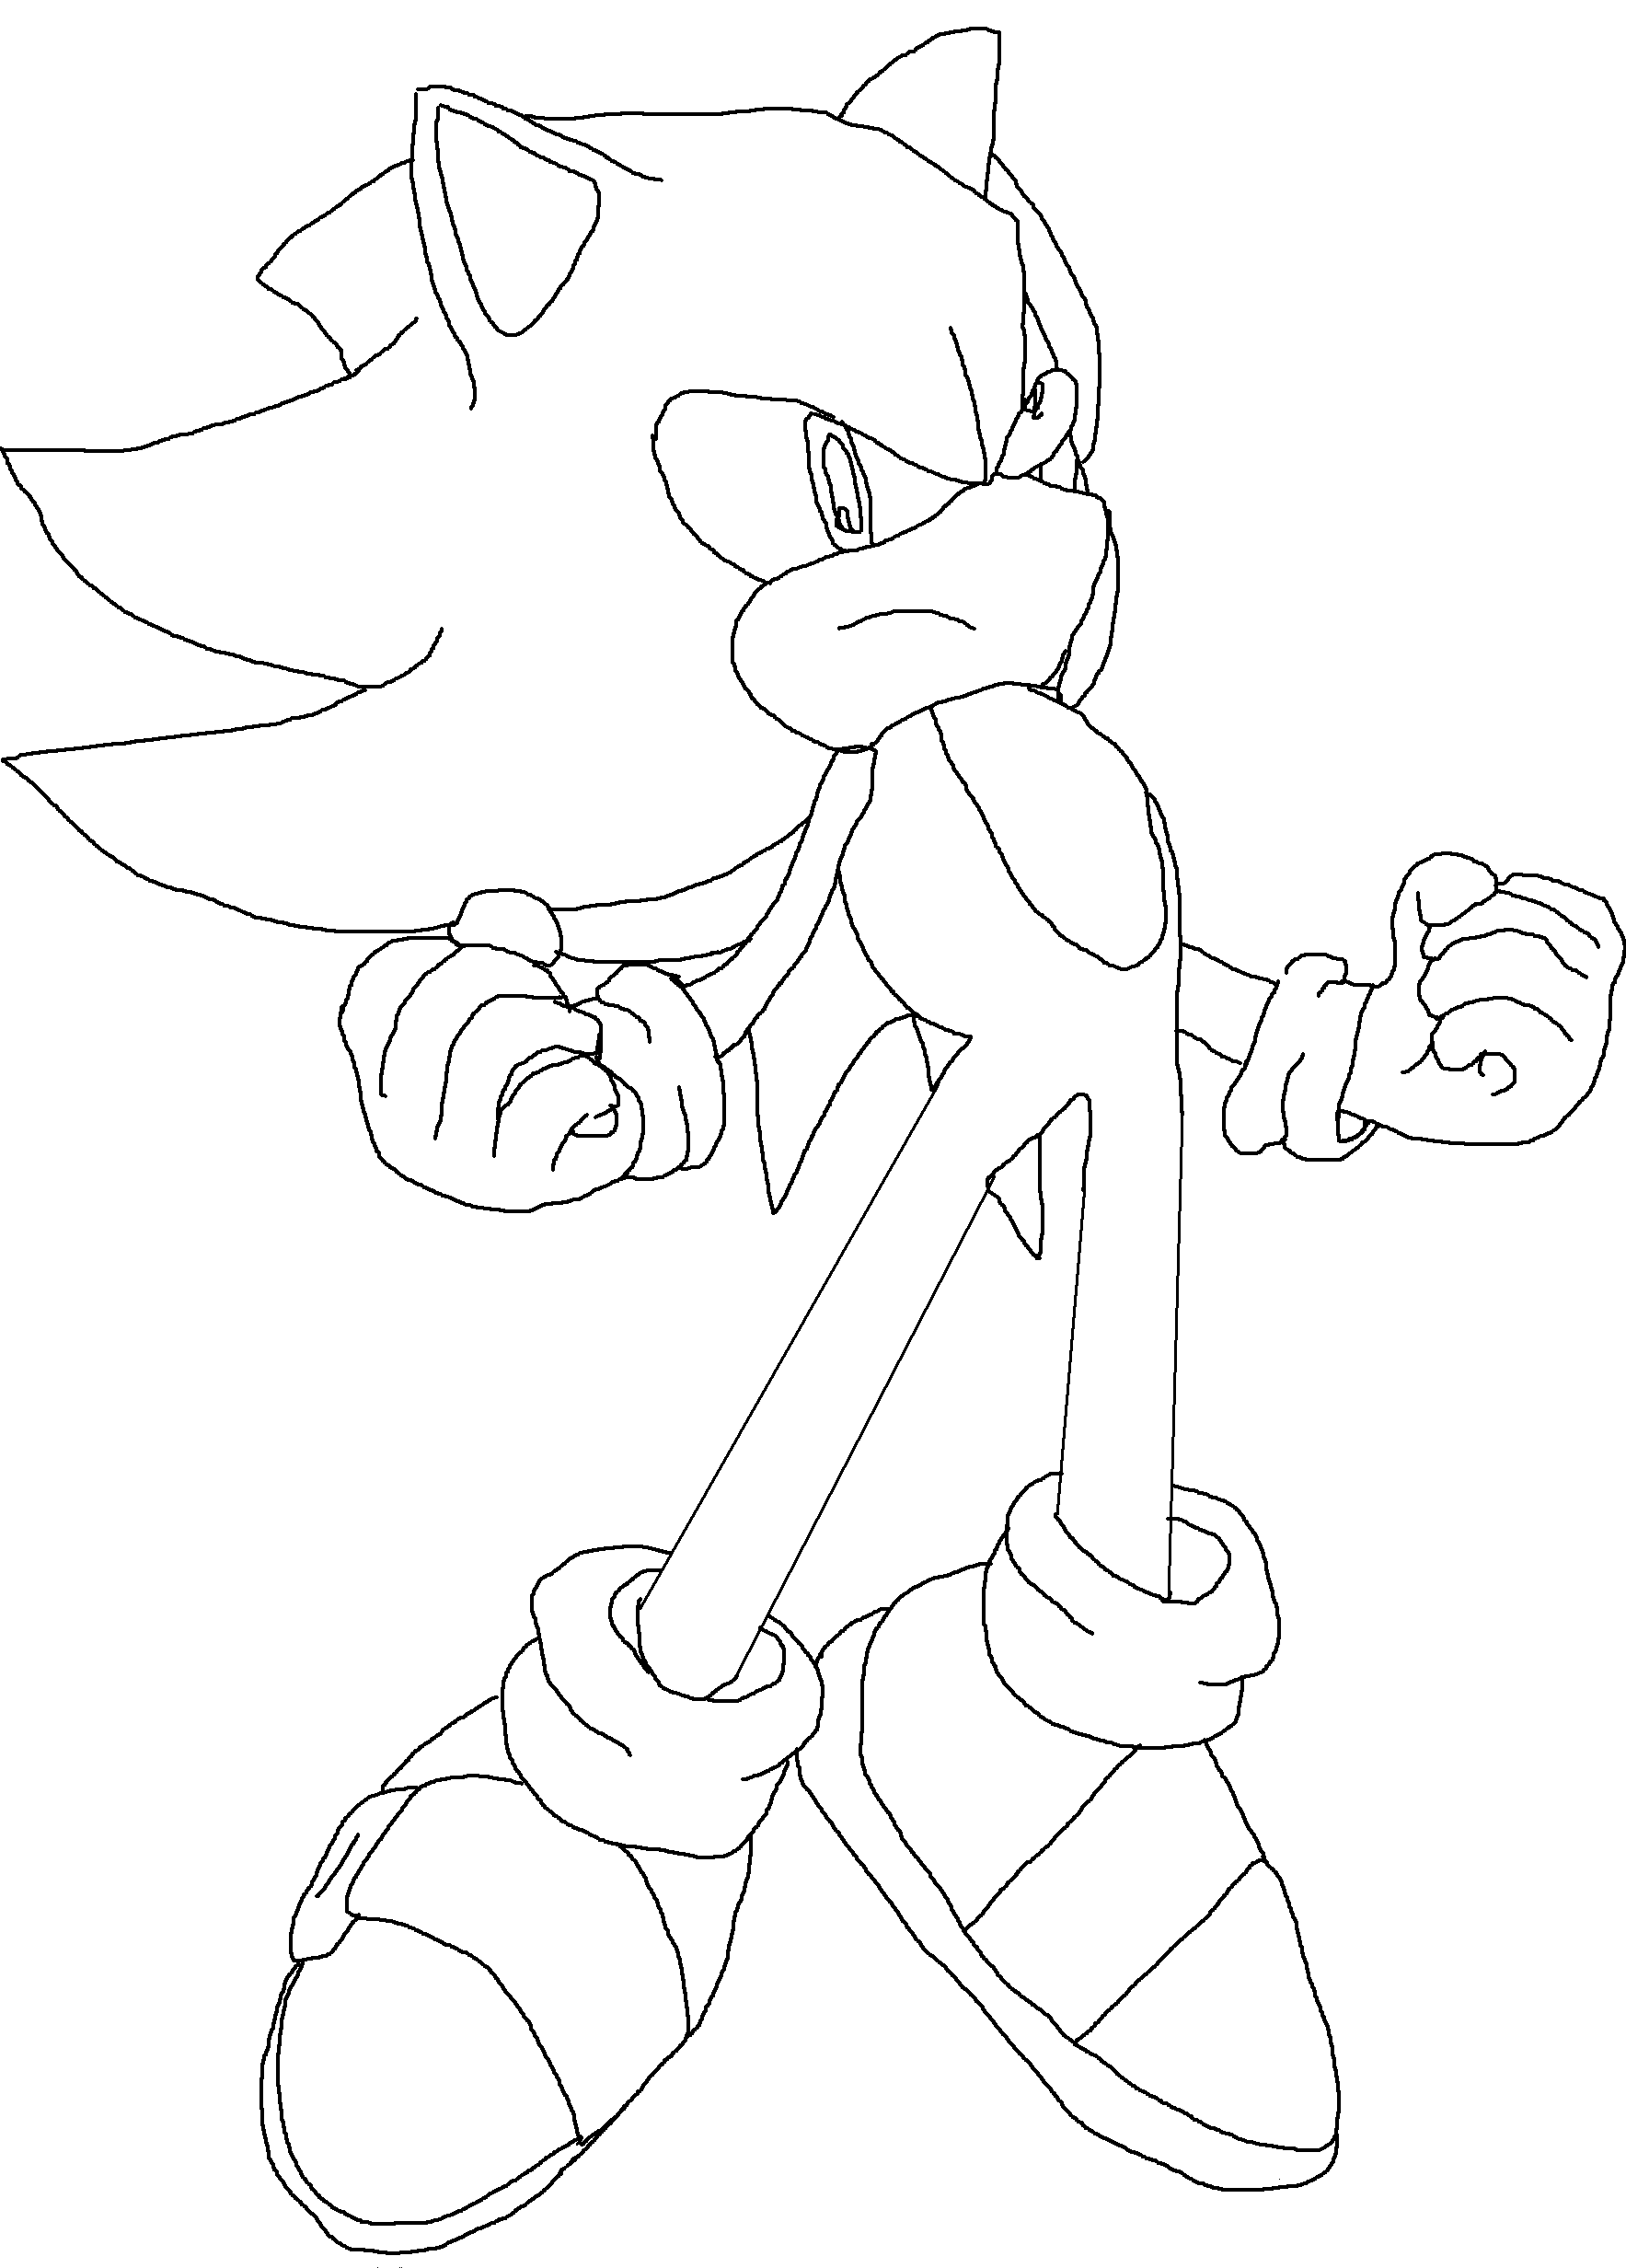 free-printable-sonic-the-hedgehog-coloring-pages-for-kids